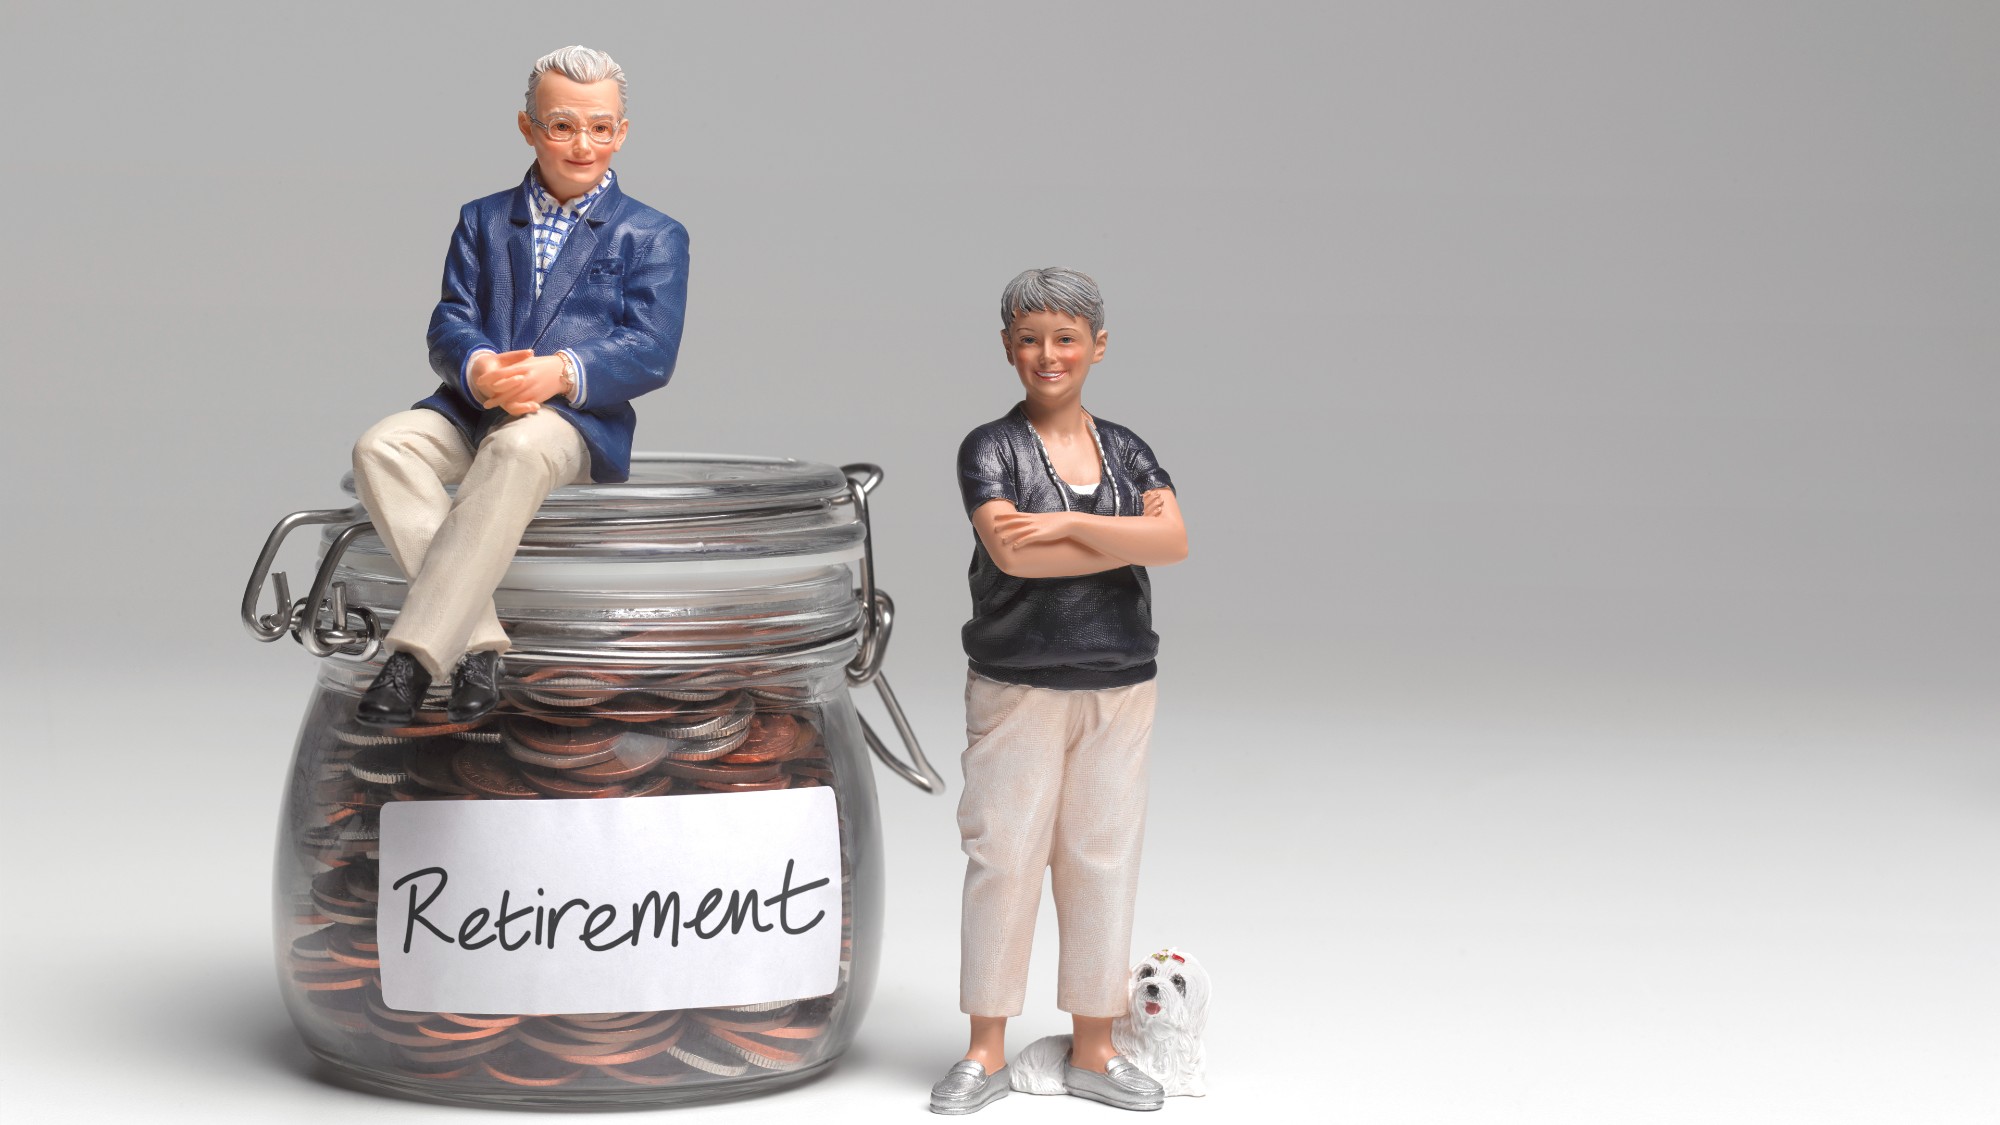  How to find someone you trust to help with retirement planning 